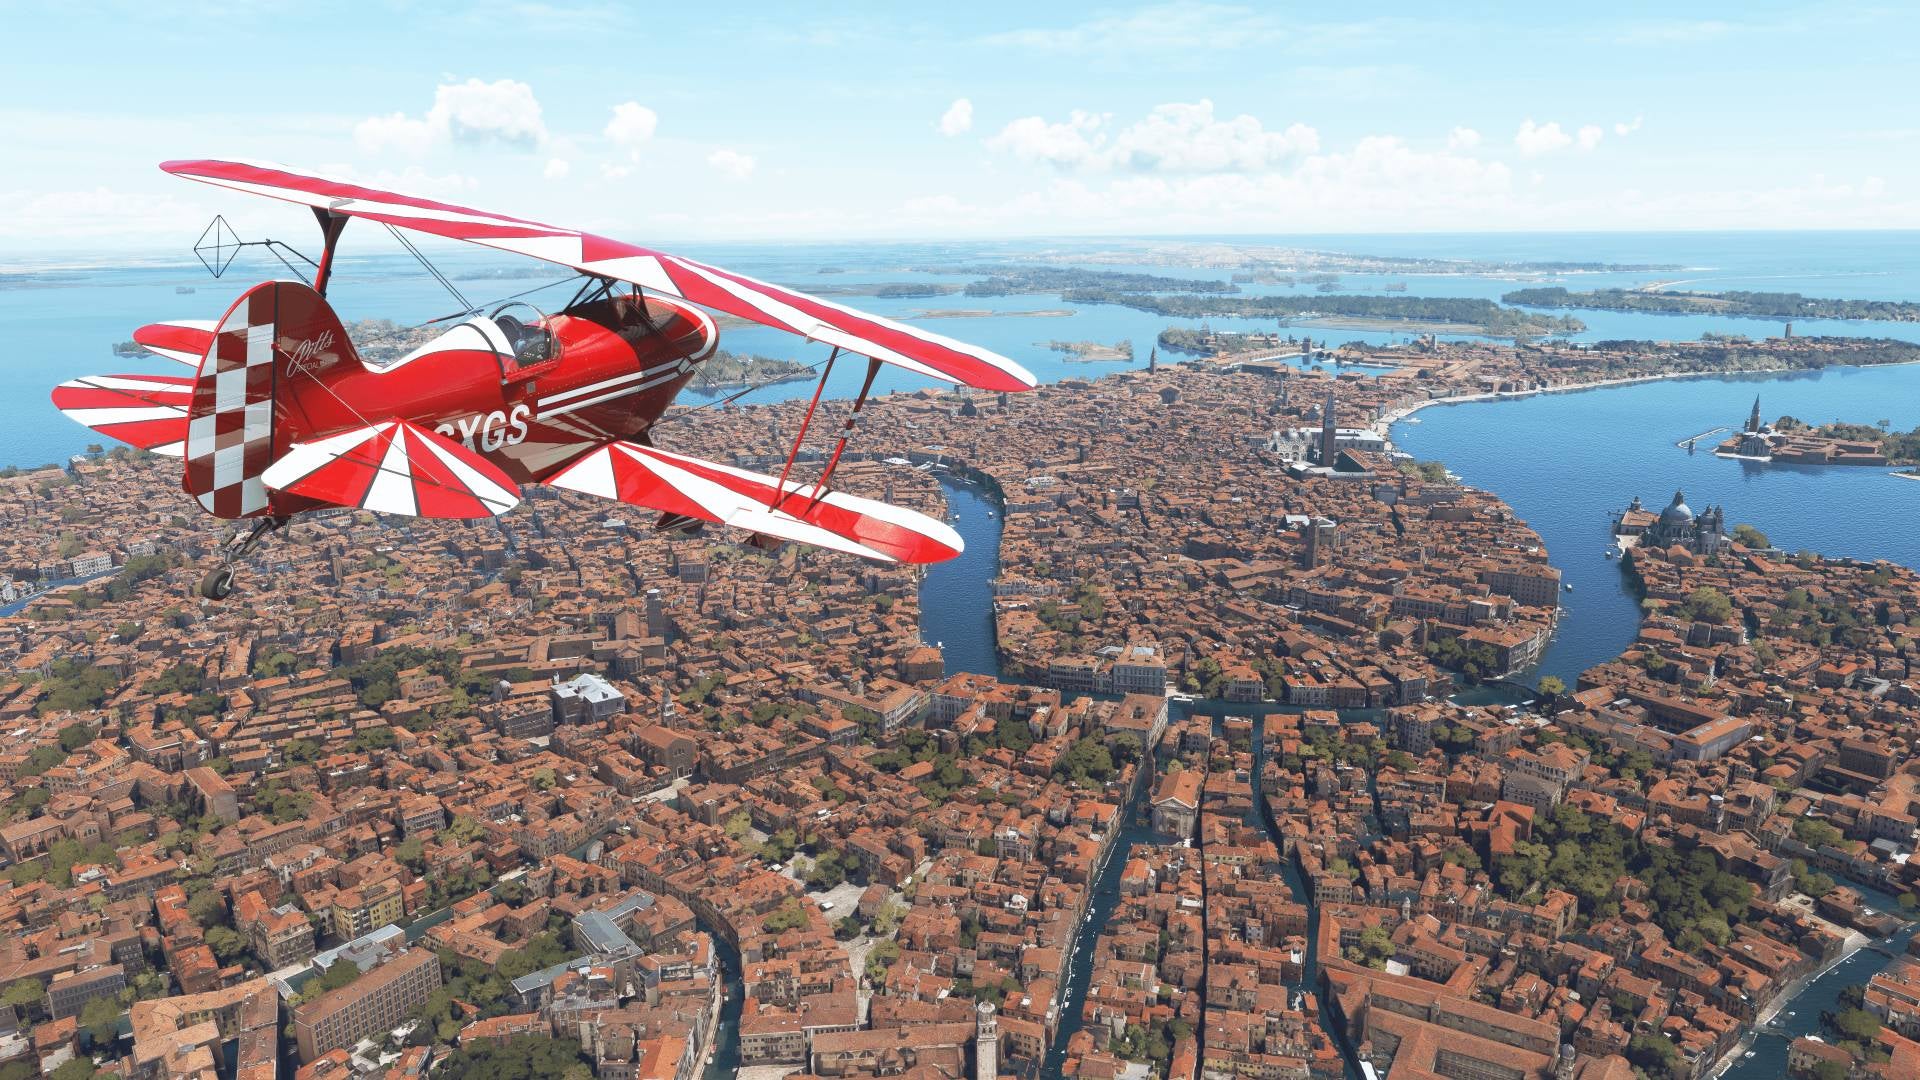 Microsoft Flight Simulator's ninth world update has improved detail for Italy and Malta